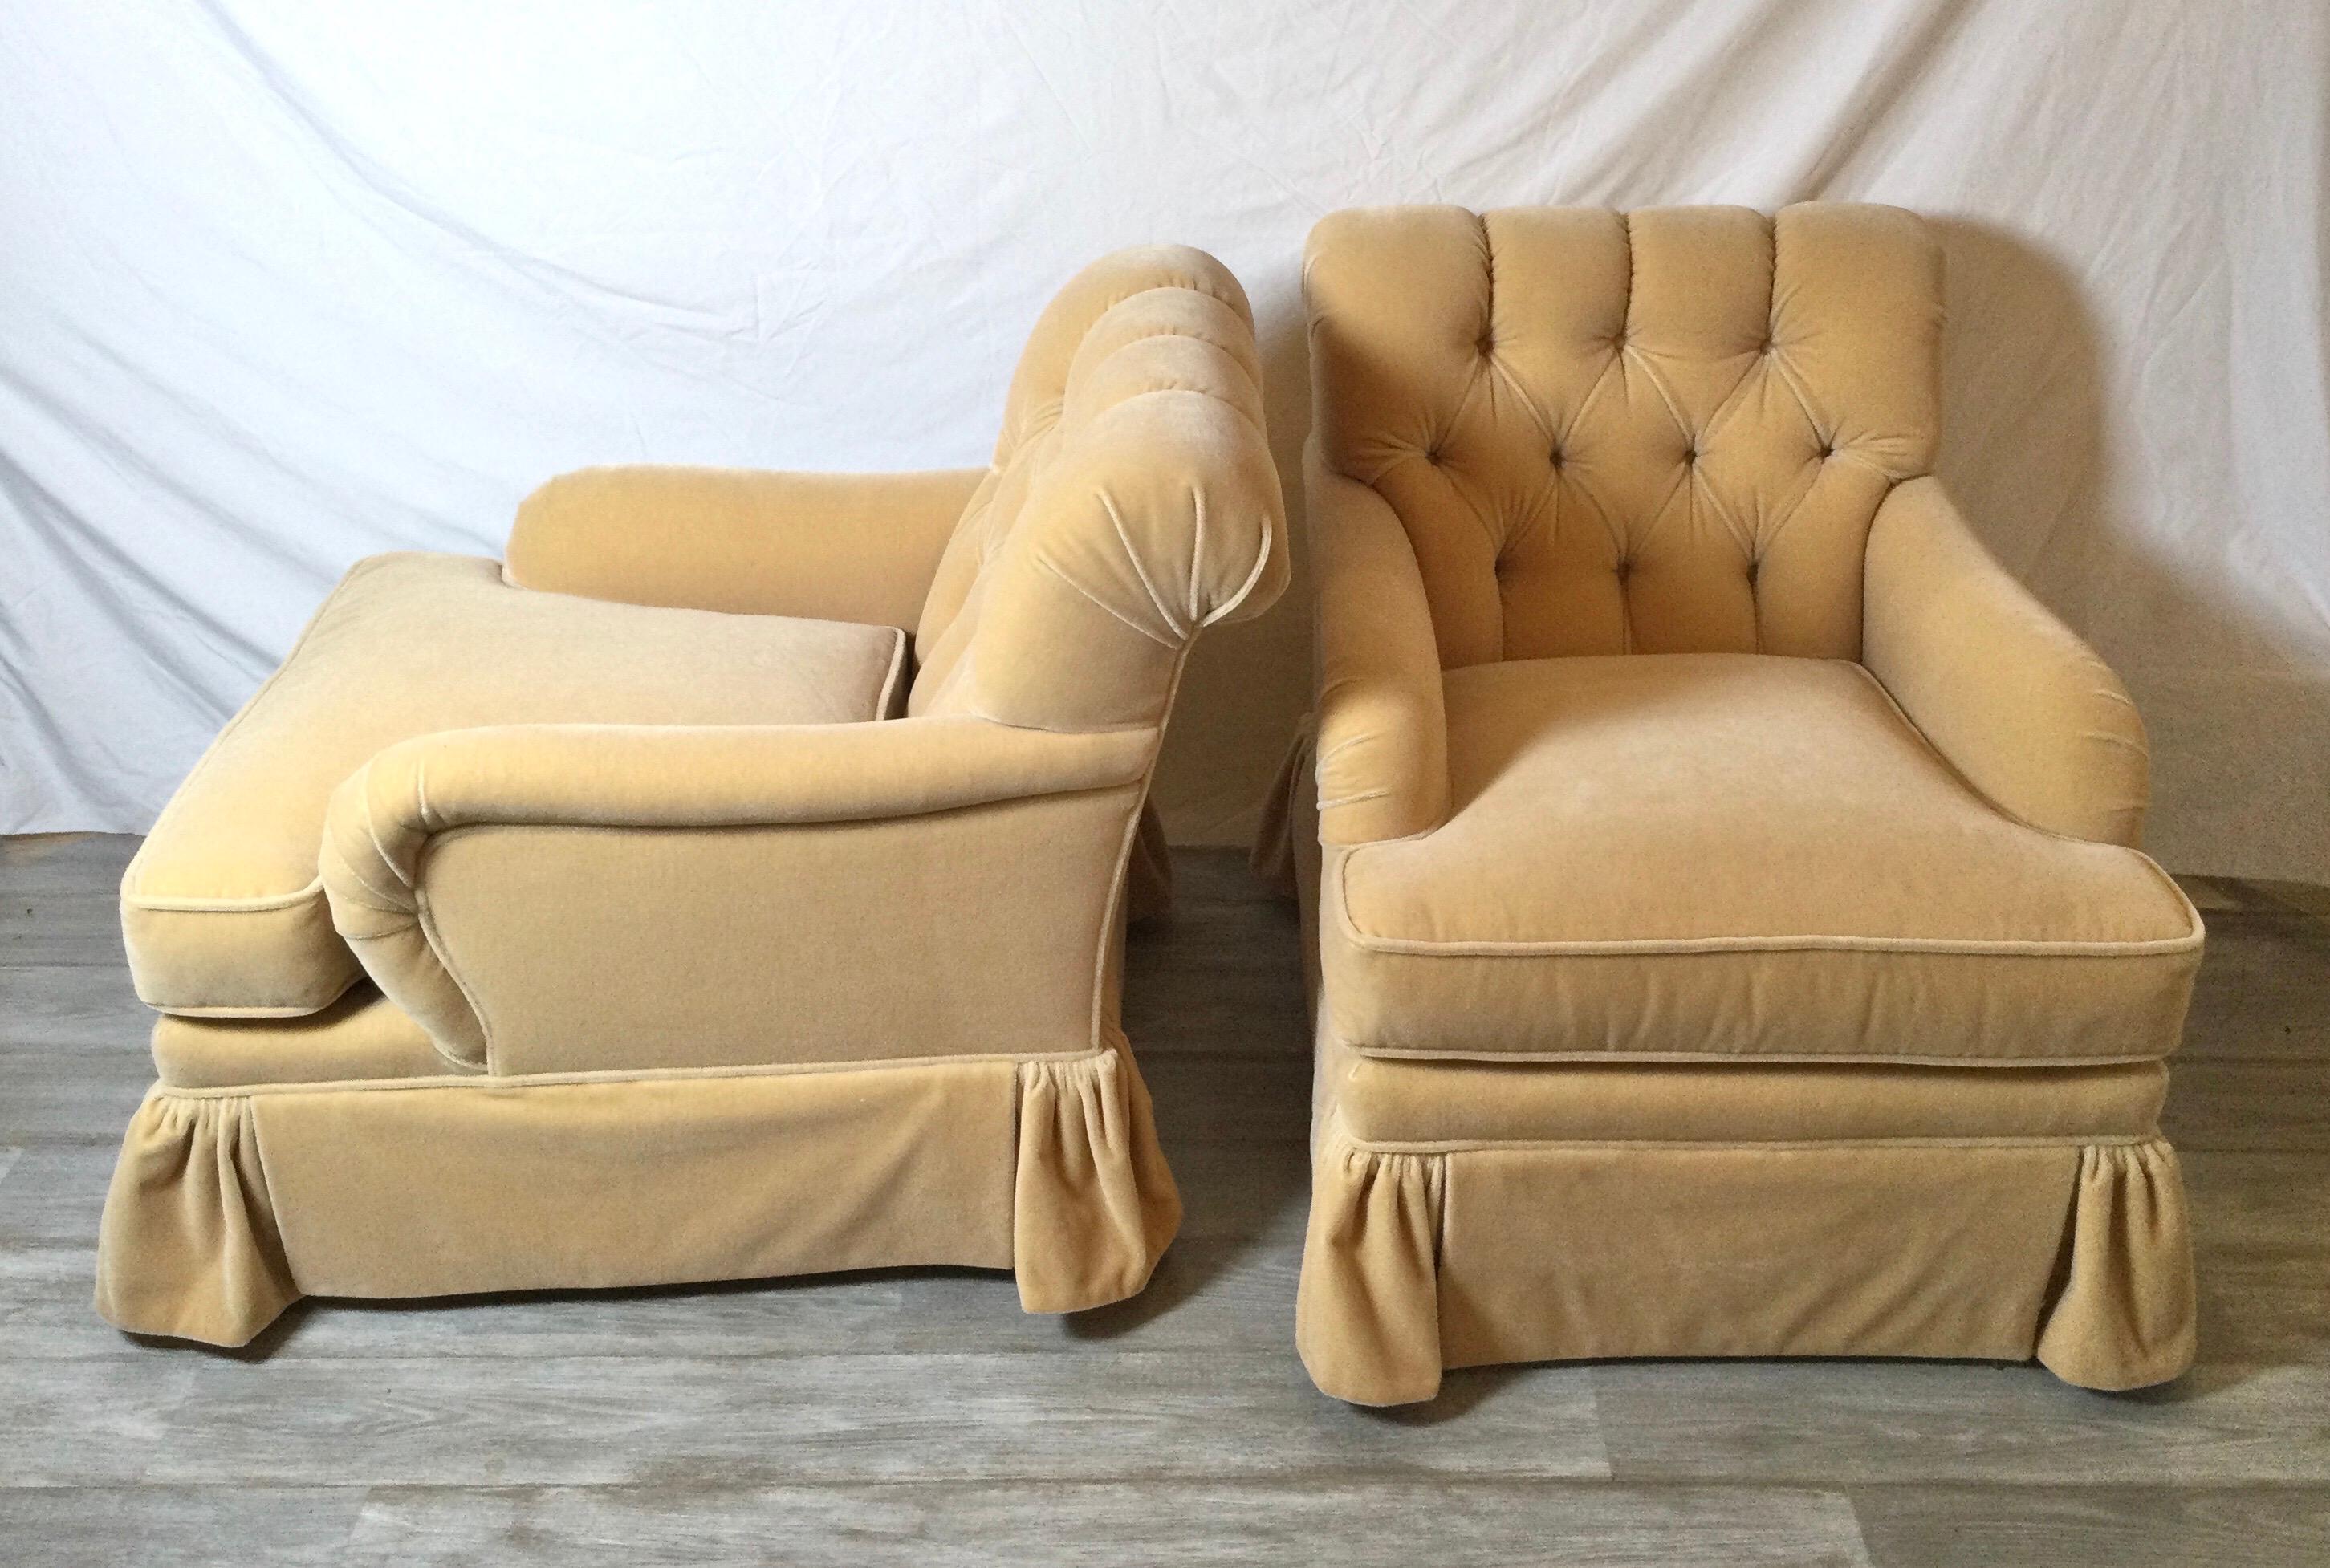 Late 20th century pair of fawn colored wool velvet club chairs with tufted backs
Newer upholstery
Dimensions: 39